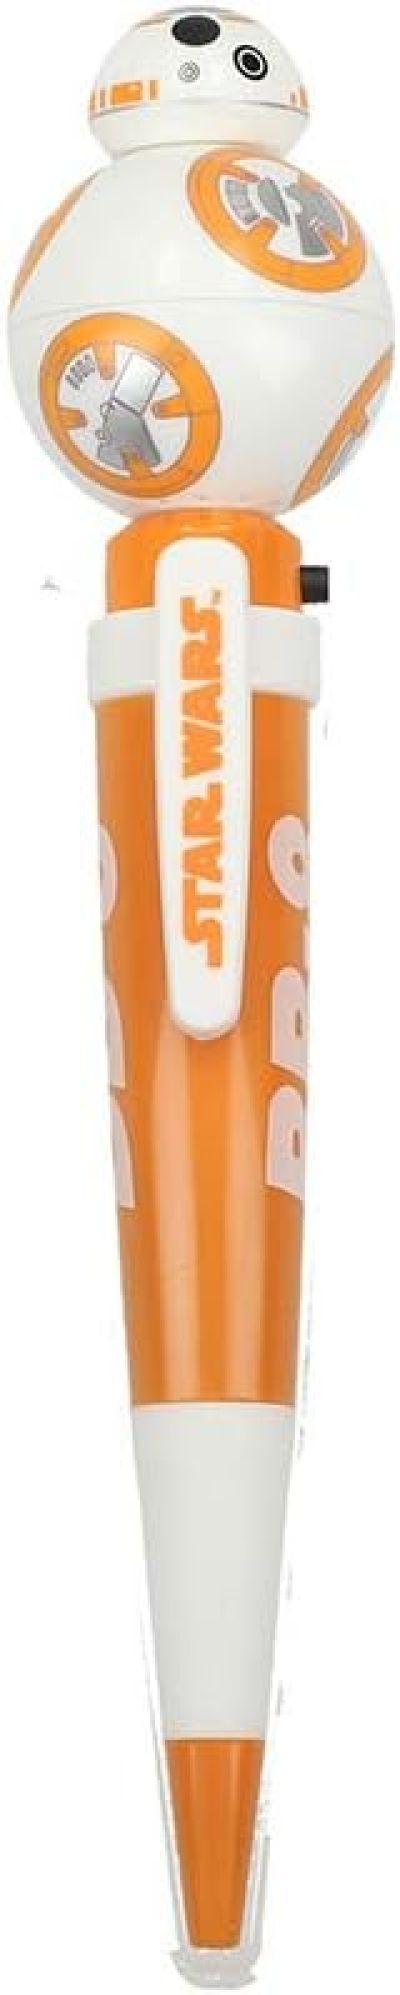 Sd Toys Merchandising Pen with Light Sound and Movement Star Wars BB-8